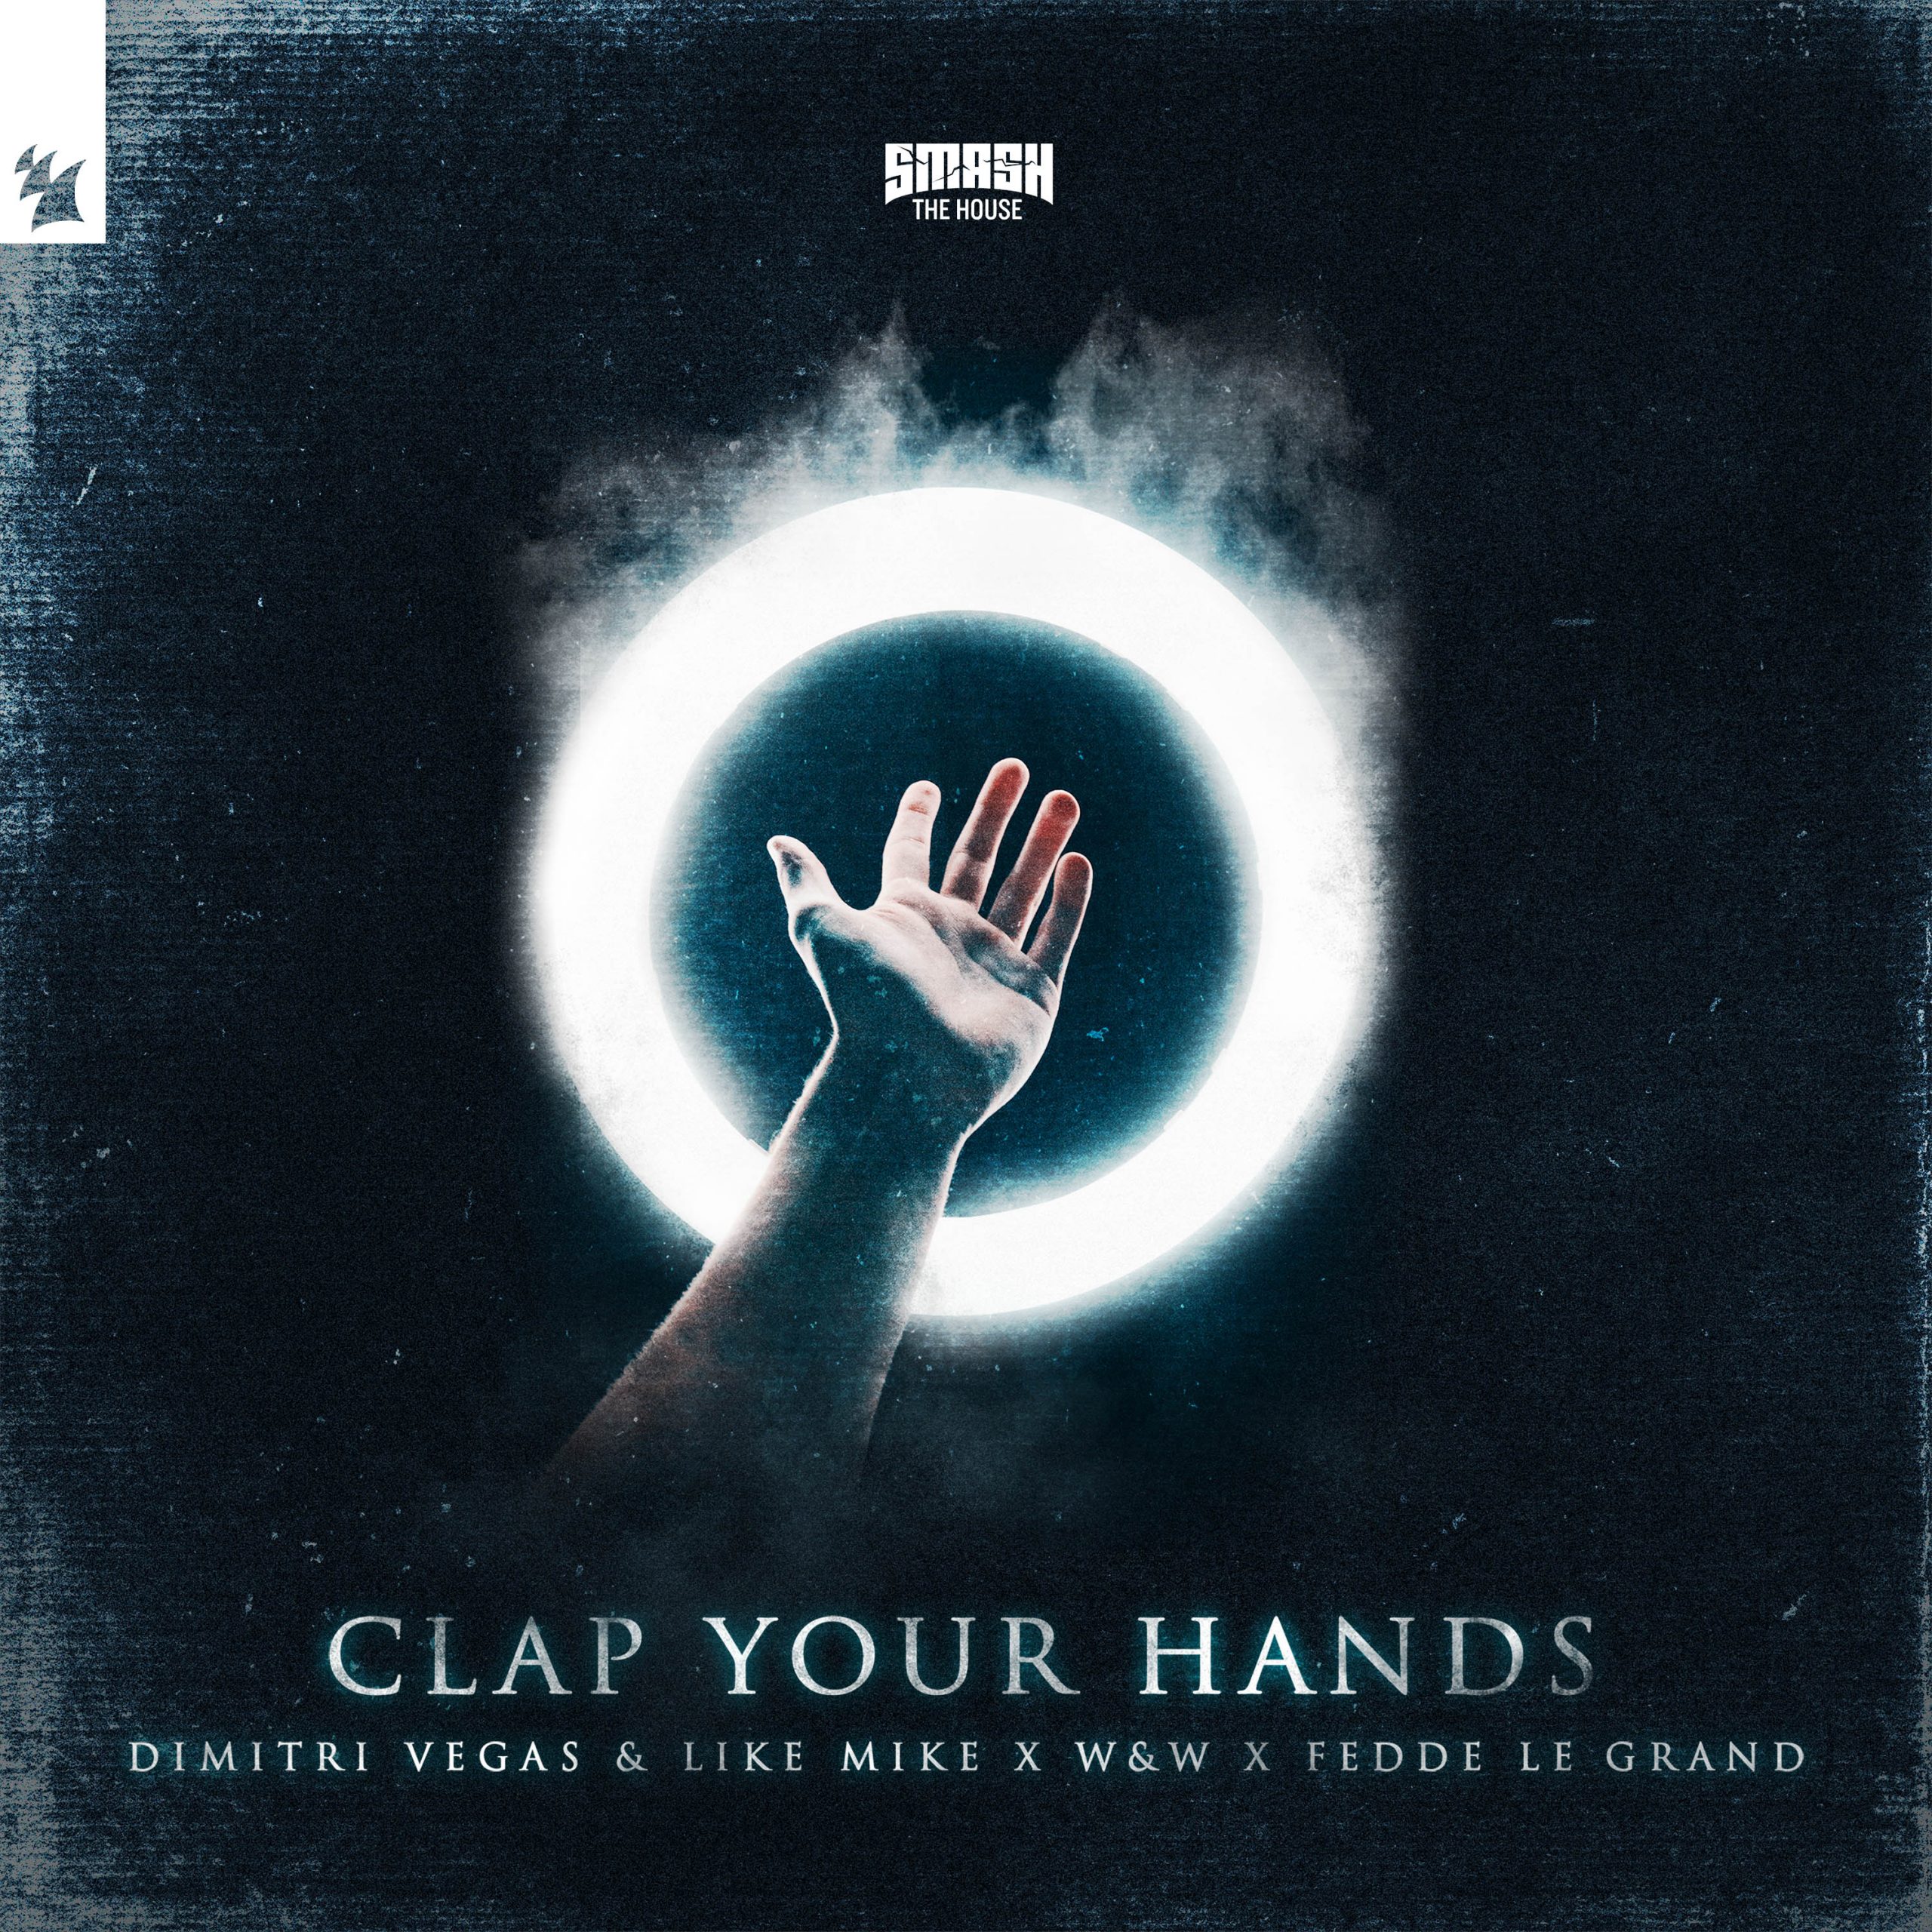 Dimitri Vegas & Like Mike W&W Fedde Le Grand Clap Your Hands